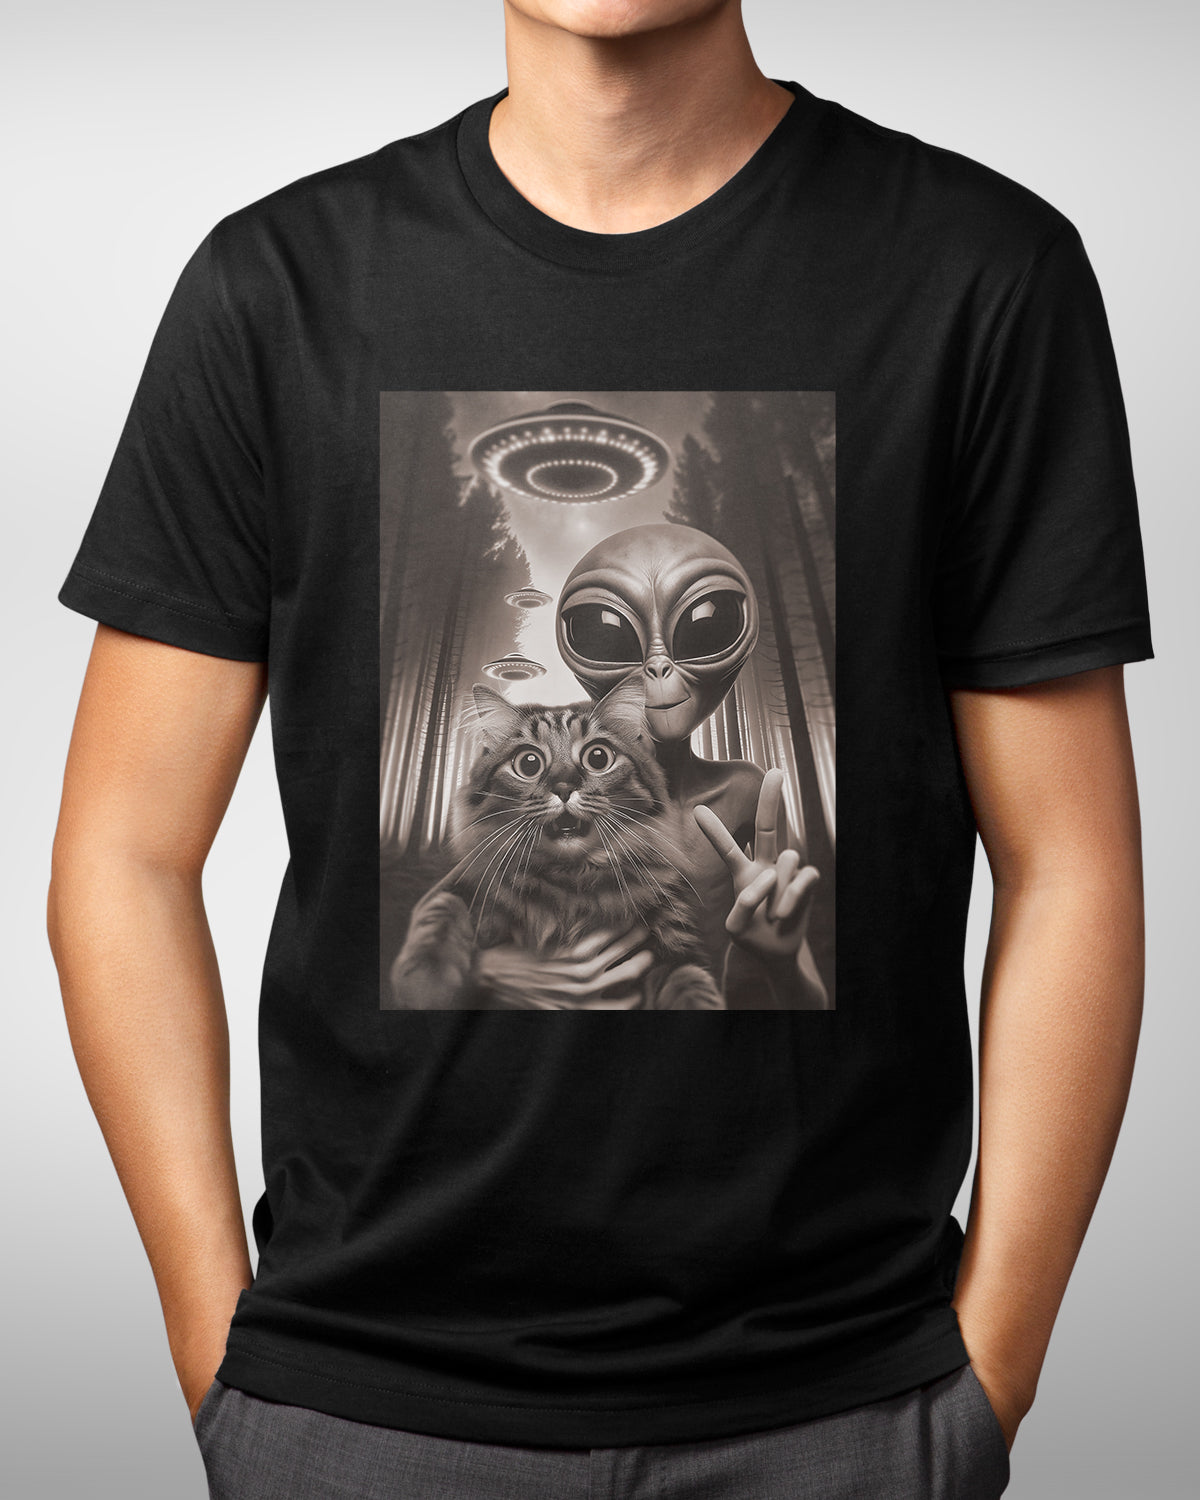 Funny Cat Selfie with Alien T-Shirt - Vintage UFO Flying Saucer Tee, Perfect Gift for Sci-Fi Lovers, Alien Invation